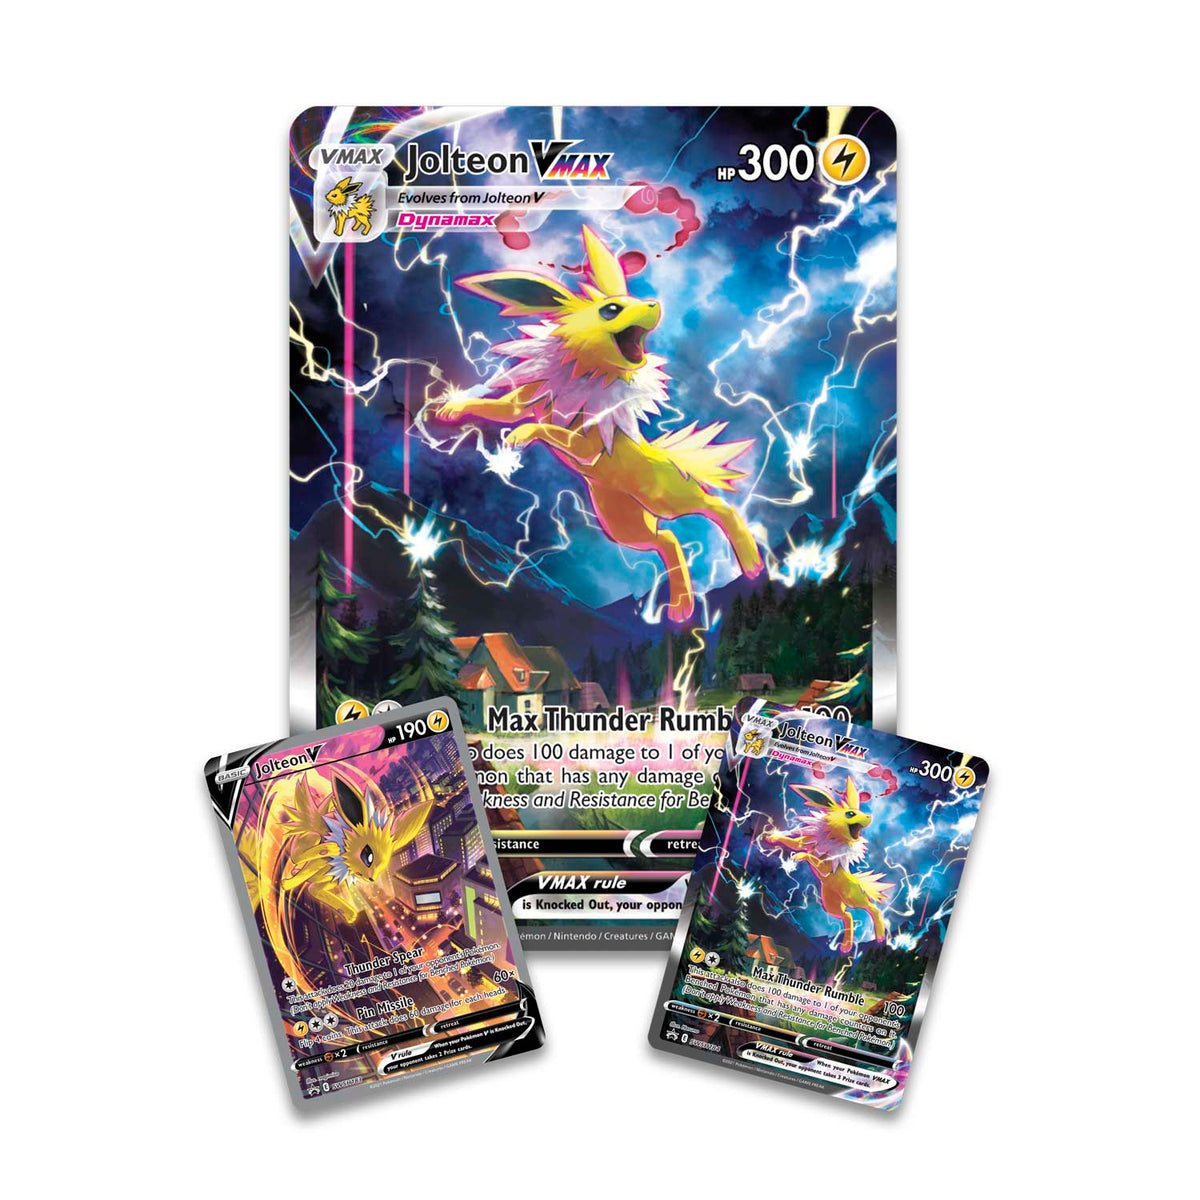 Pokemon TCG: VMAX Premium Collection-Completed Set of 3-The Pokémon Company International-Ace Cards &amp; Collectibles